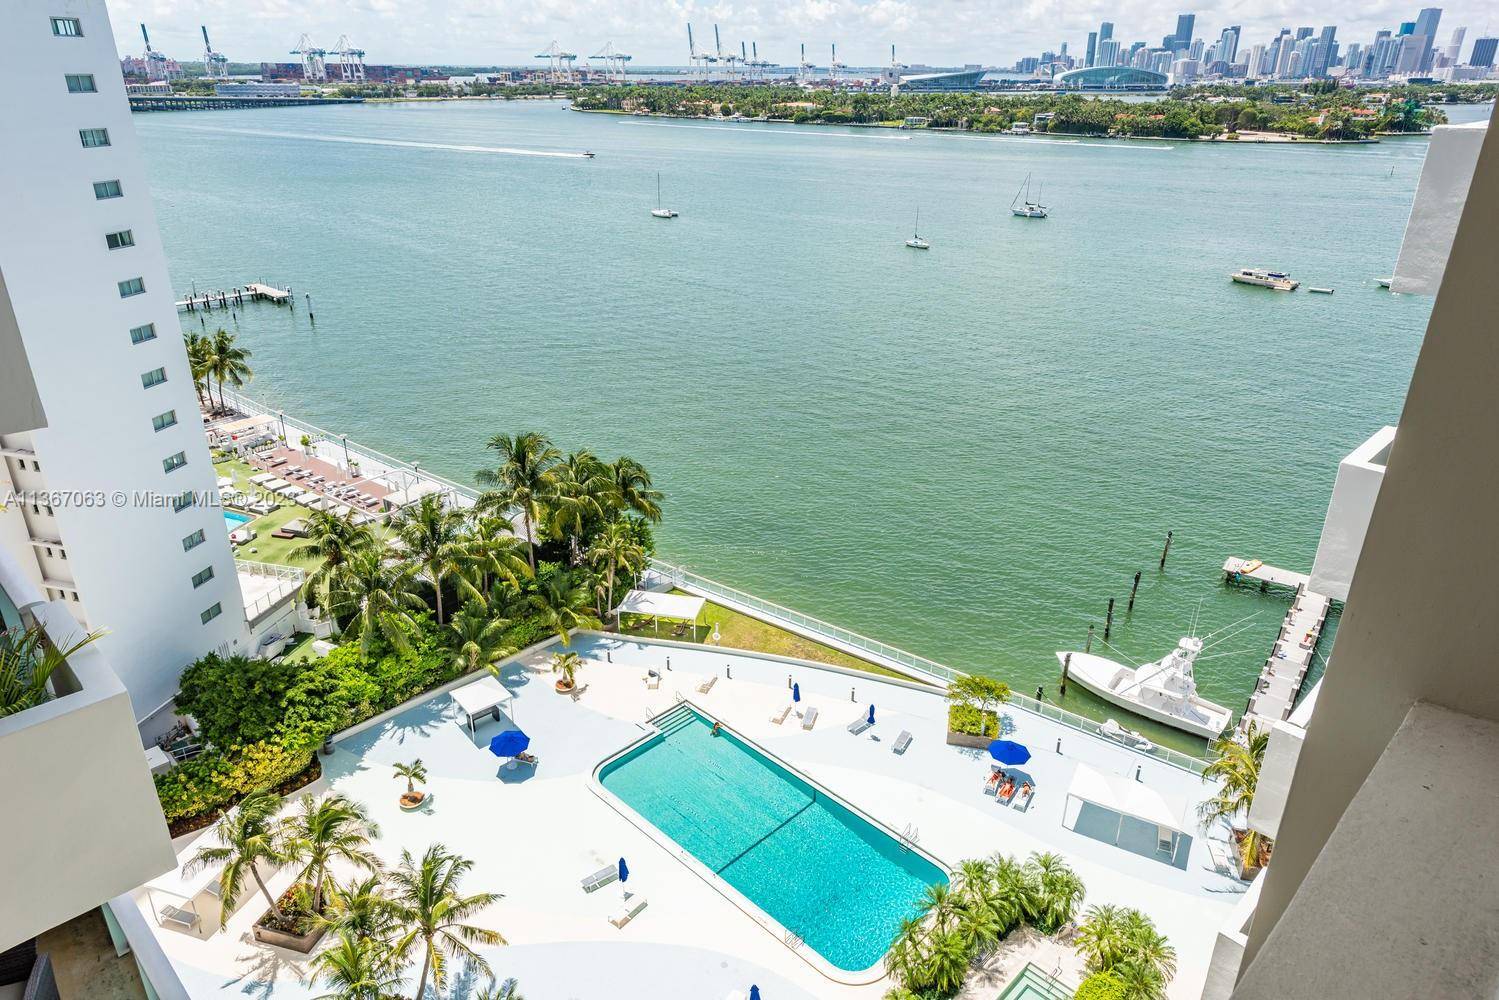 Enjoy spectacular Biscayne Bay, Port of Miami and Downtown views from this bright and beautifully renovated 1 bedroom 1 bath apartment, spacious living and dining areas ideal for entertaining.